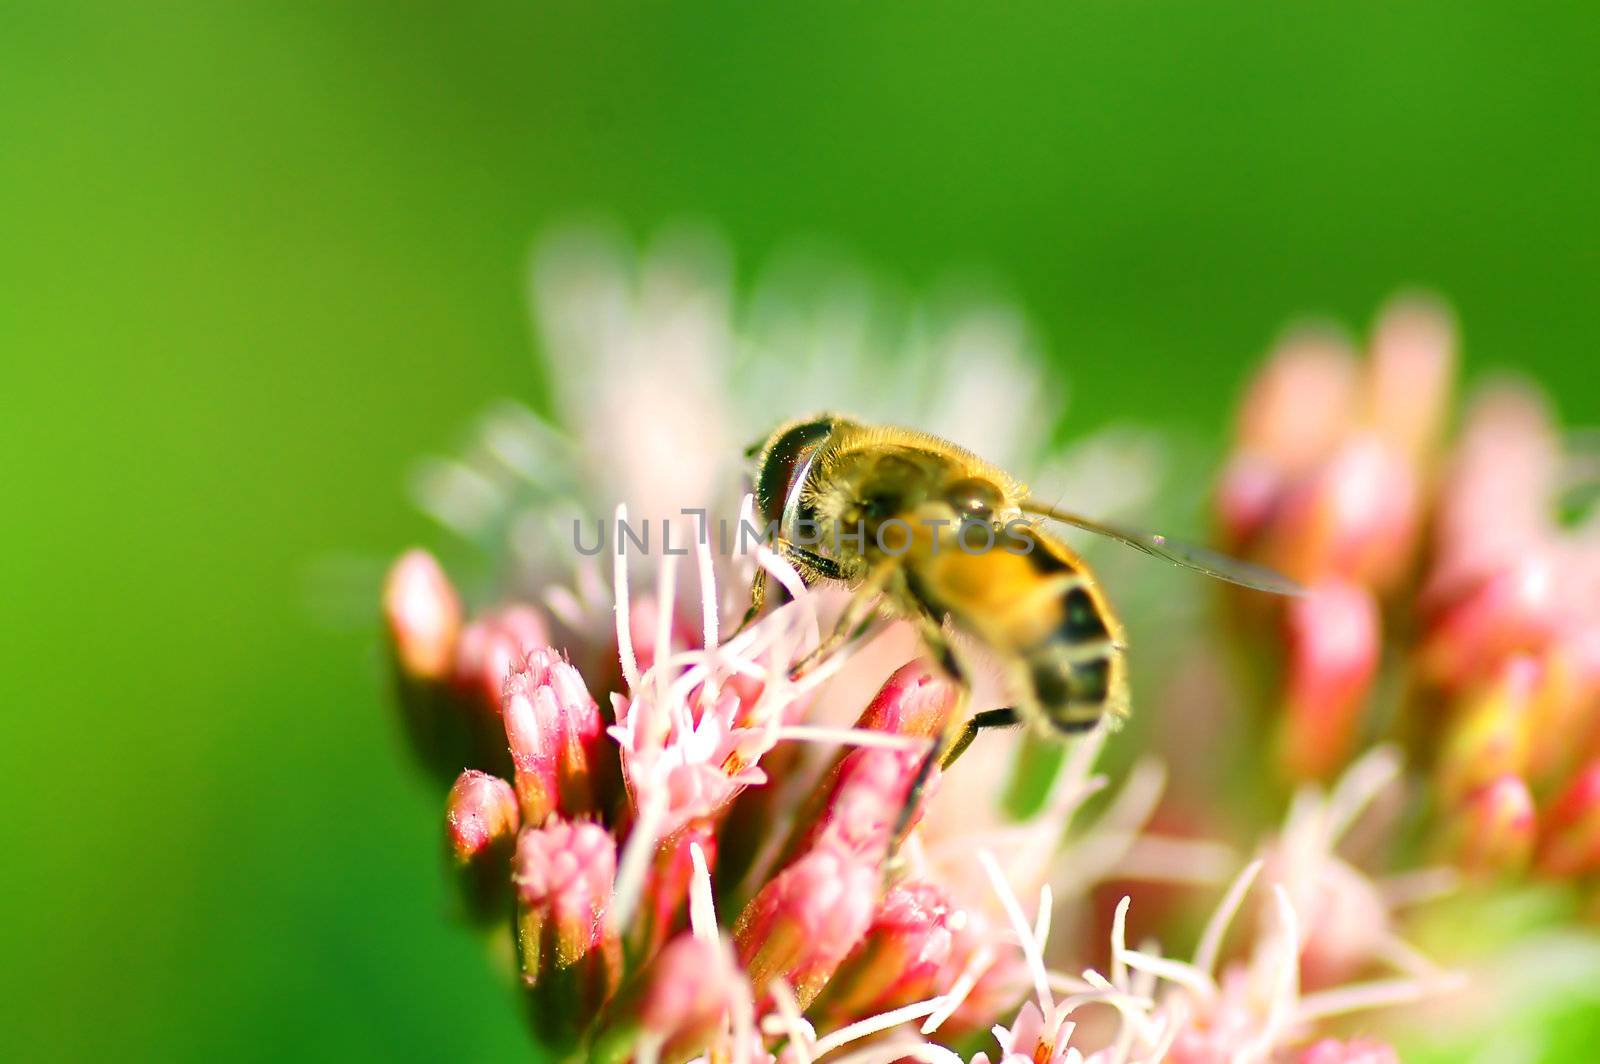 Bright photo of BEE working on flower